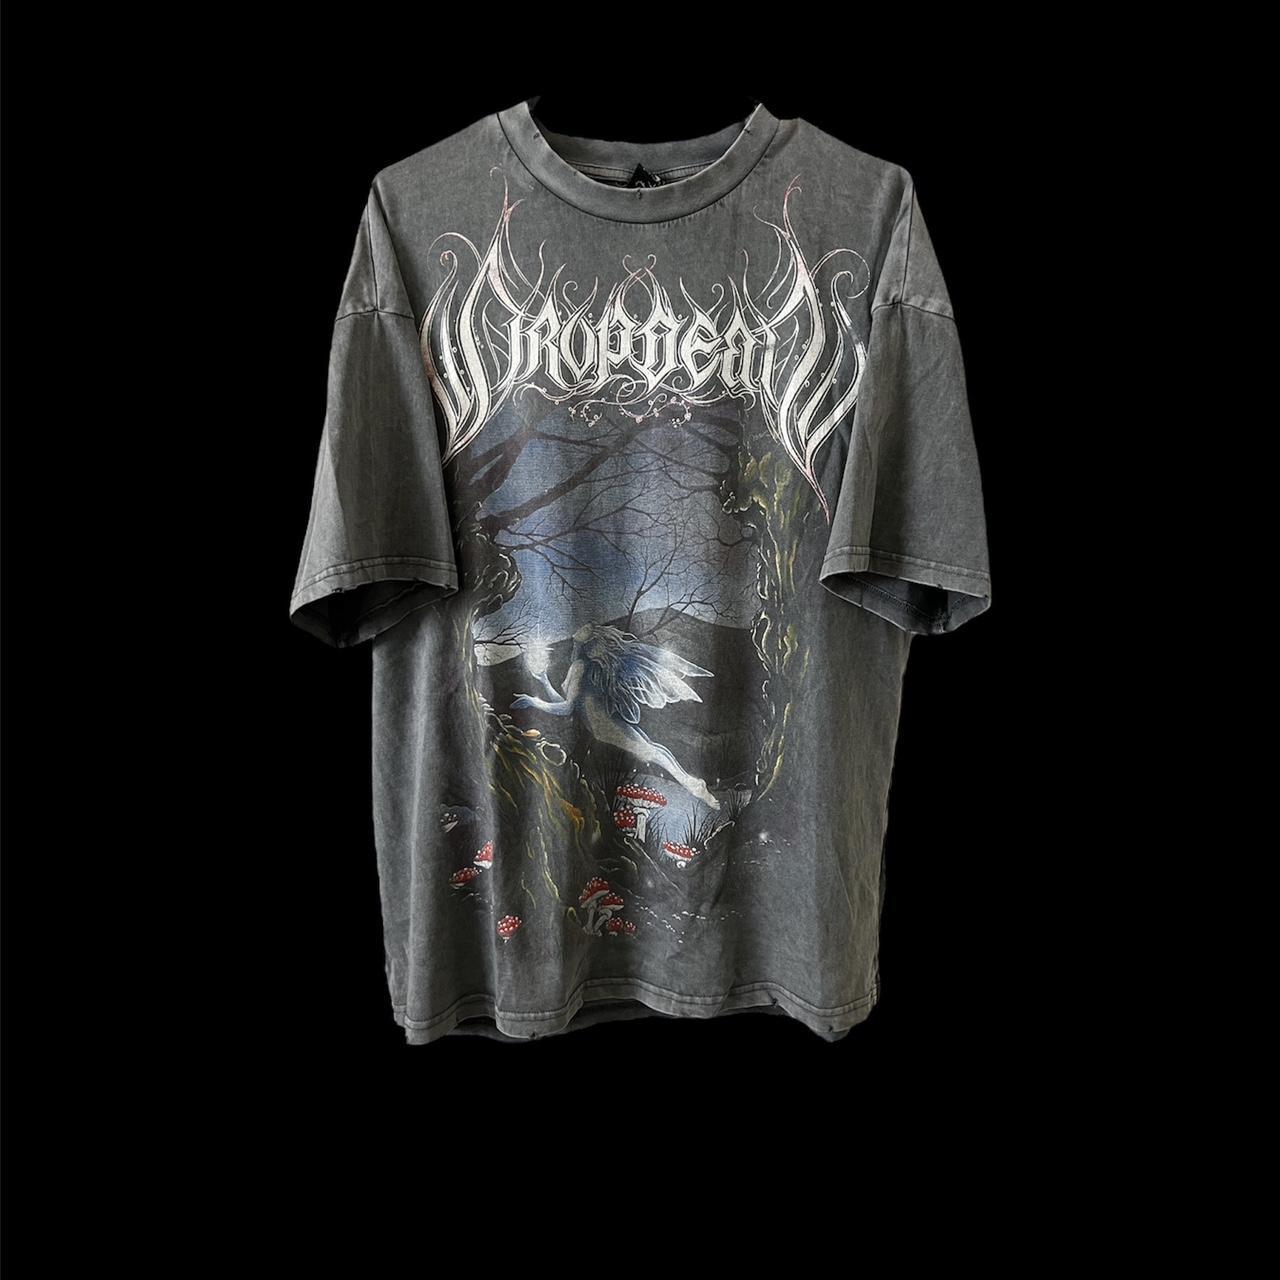 Dropdead Men's Grey and White T-shirt